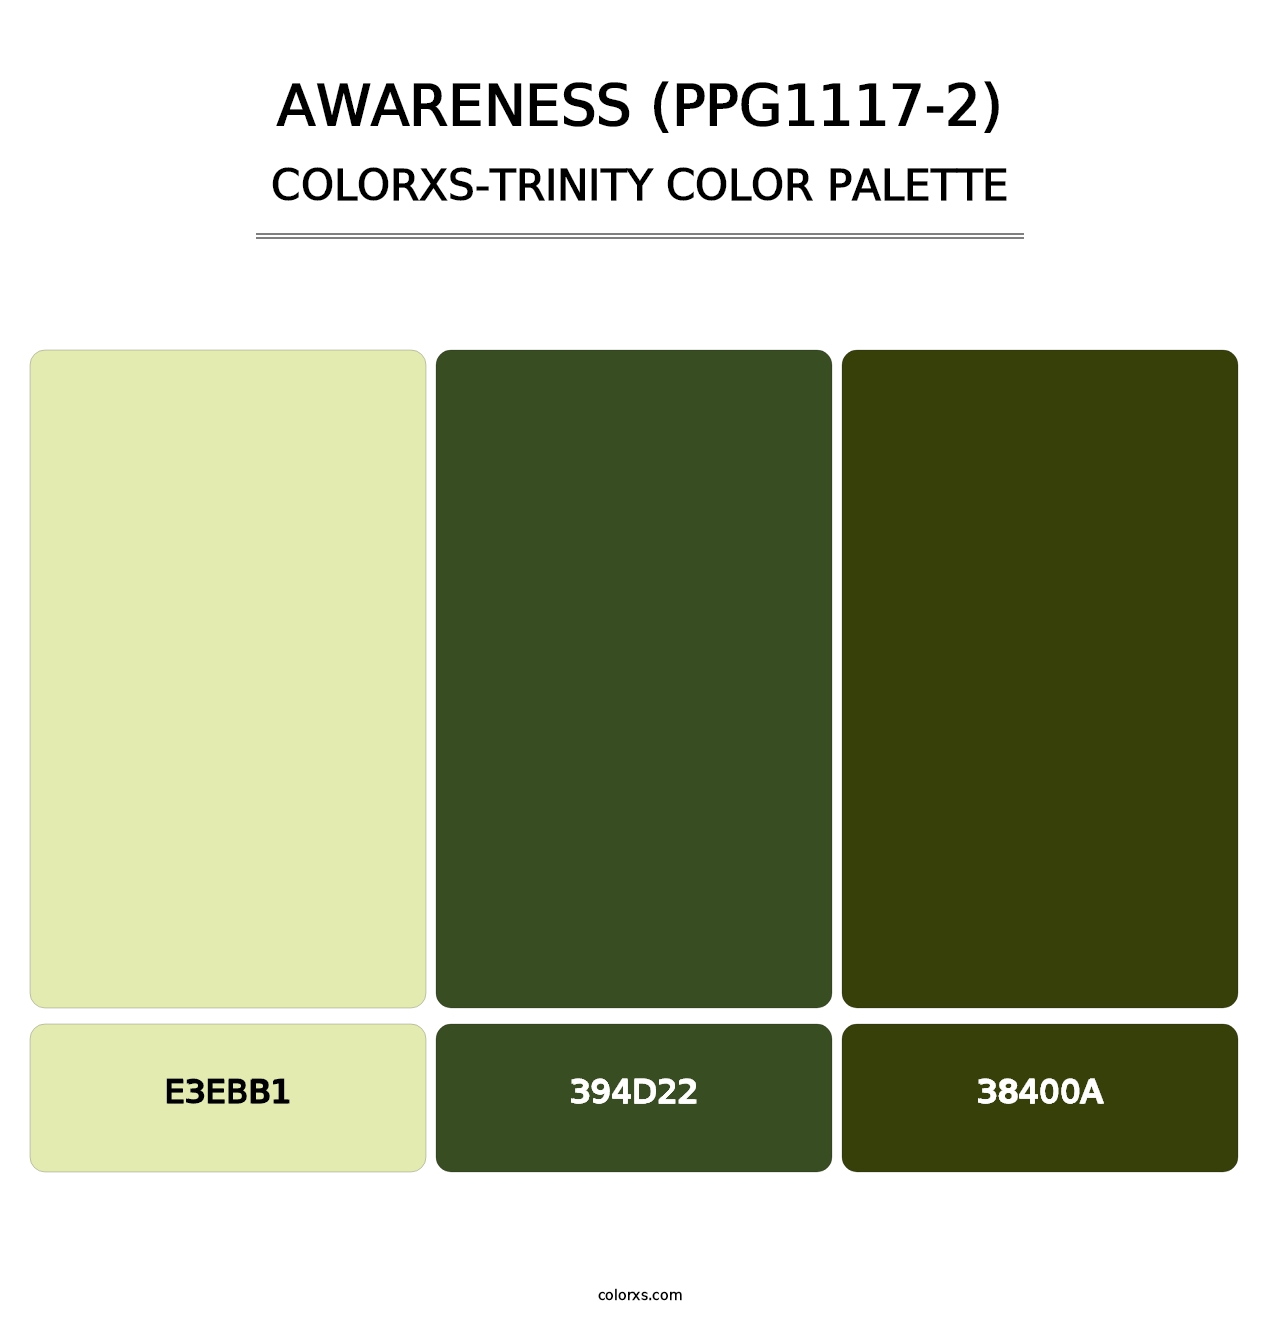 Awareness (PPG1117-2) - Colorxs Trinity Palette